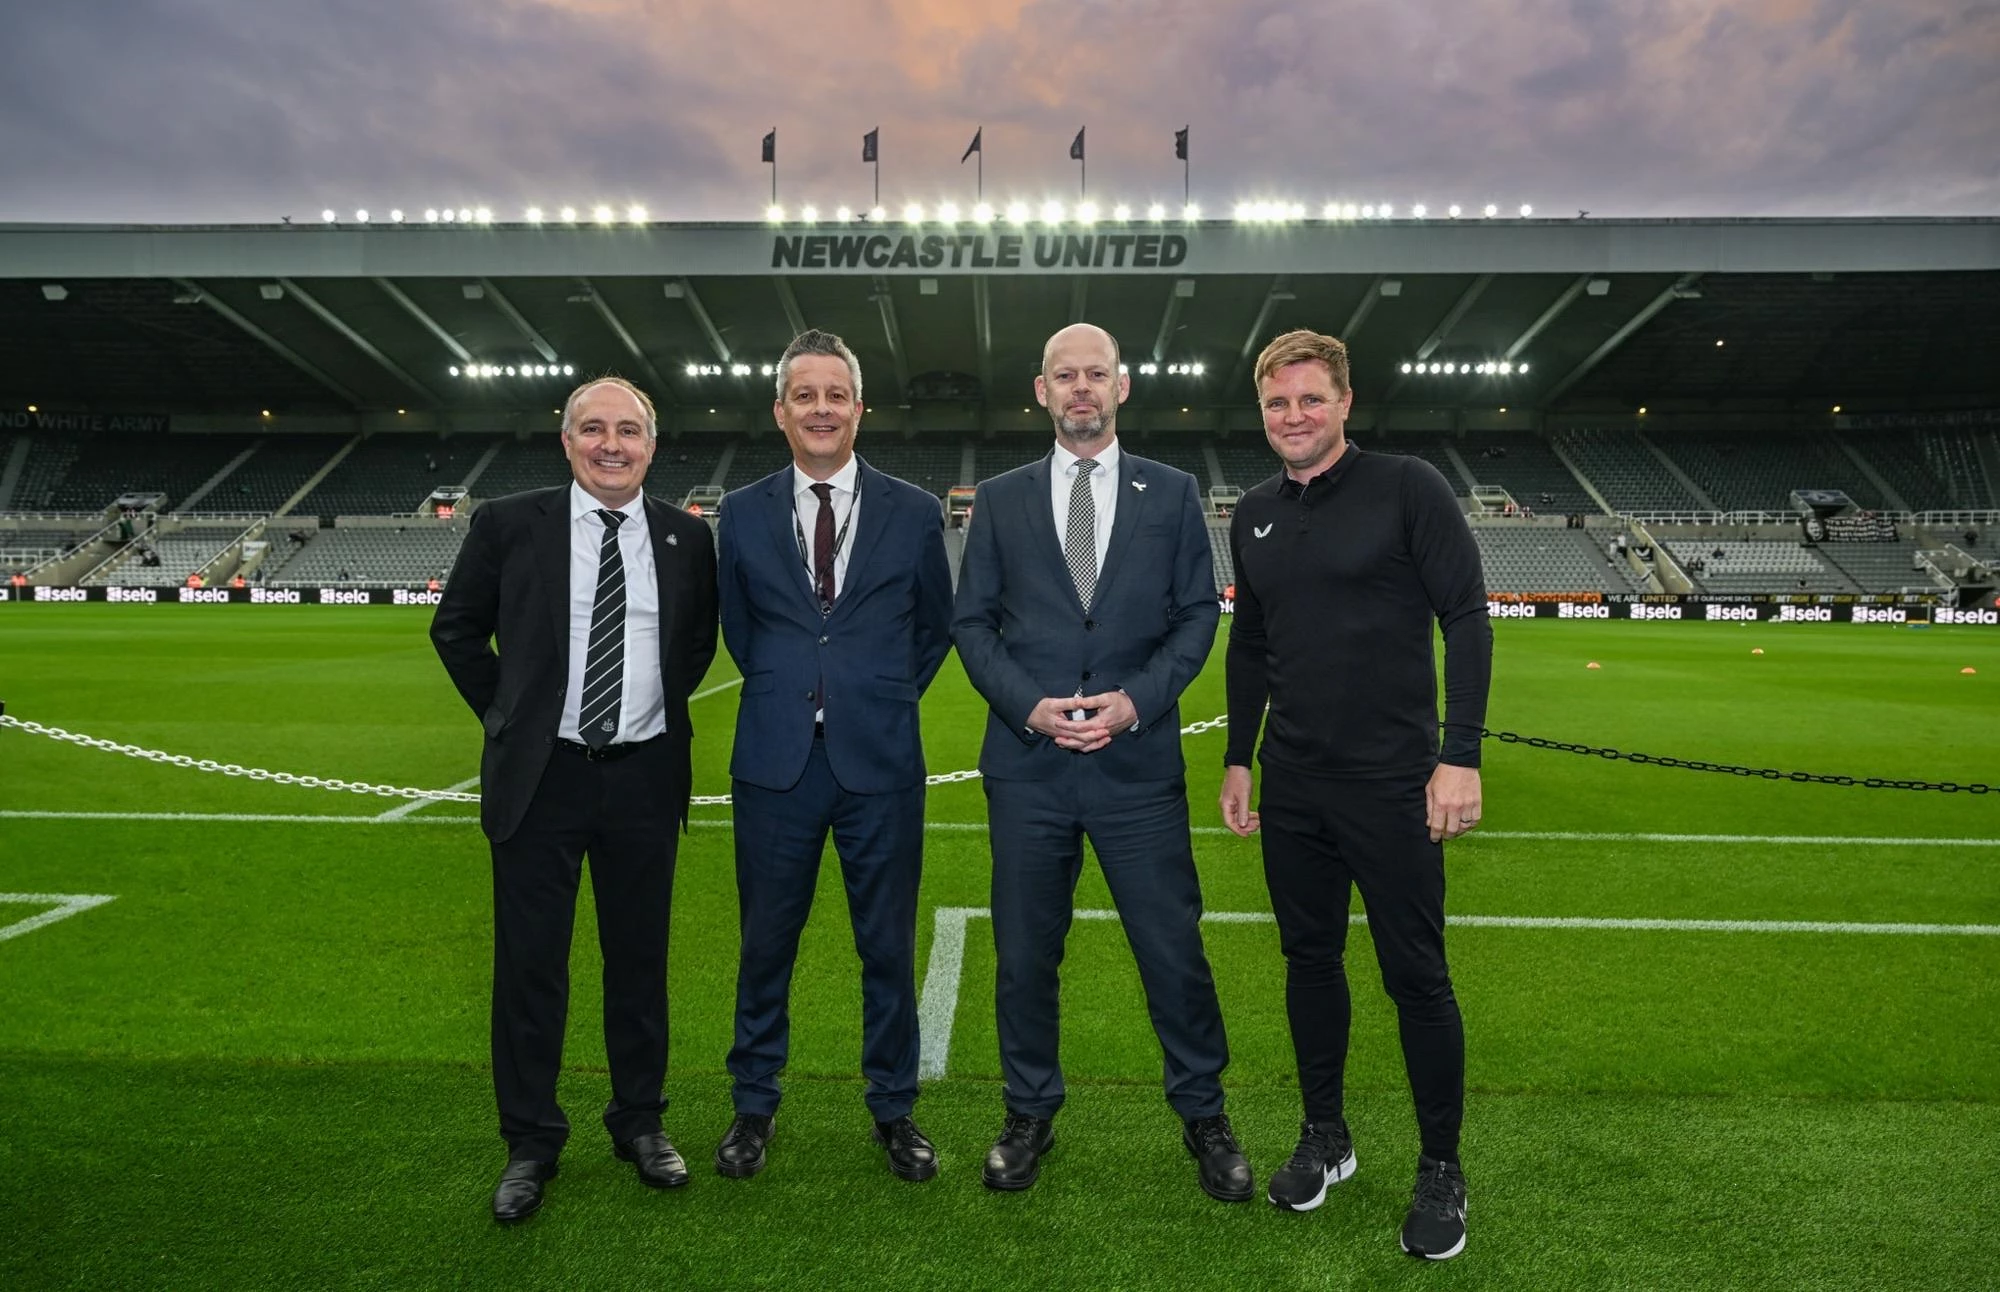 Newcastle United CEO Darren Eales, Leader of Newcastle City Council Cllr Nick Kemp, Mayor of North of Tyne Jamie Driscoll and Newcastle United manager Eddie Howe.